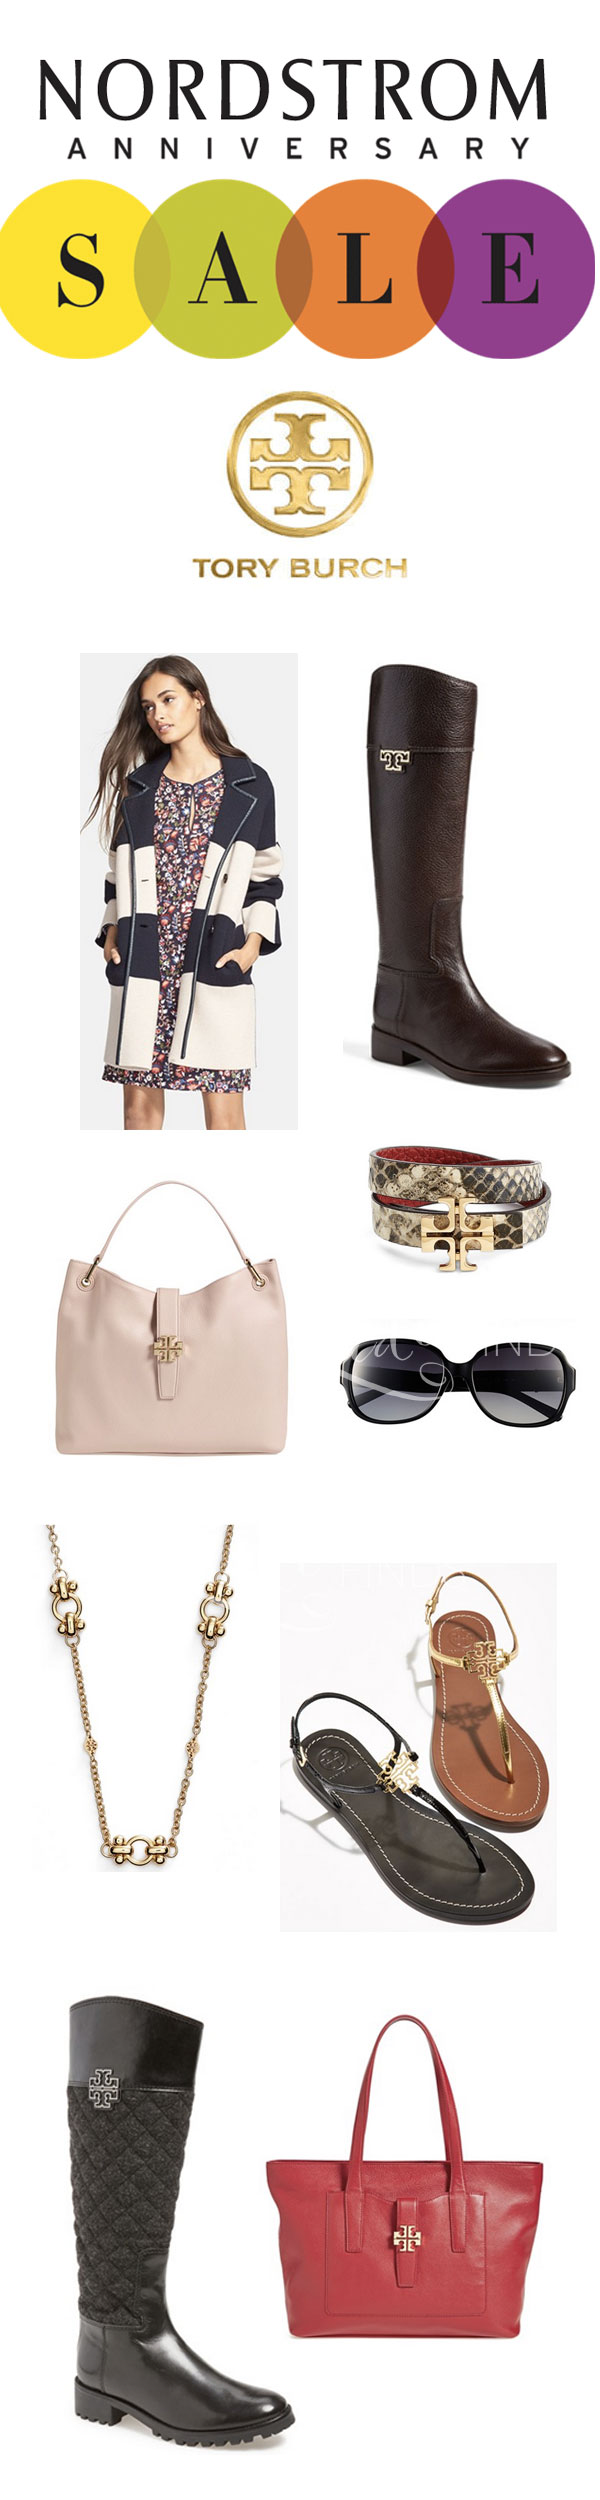 My LuxeFinds: Style Guide: Nordstrom Anniversary Sale - Tory Burch